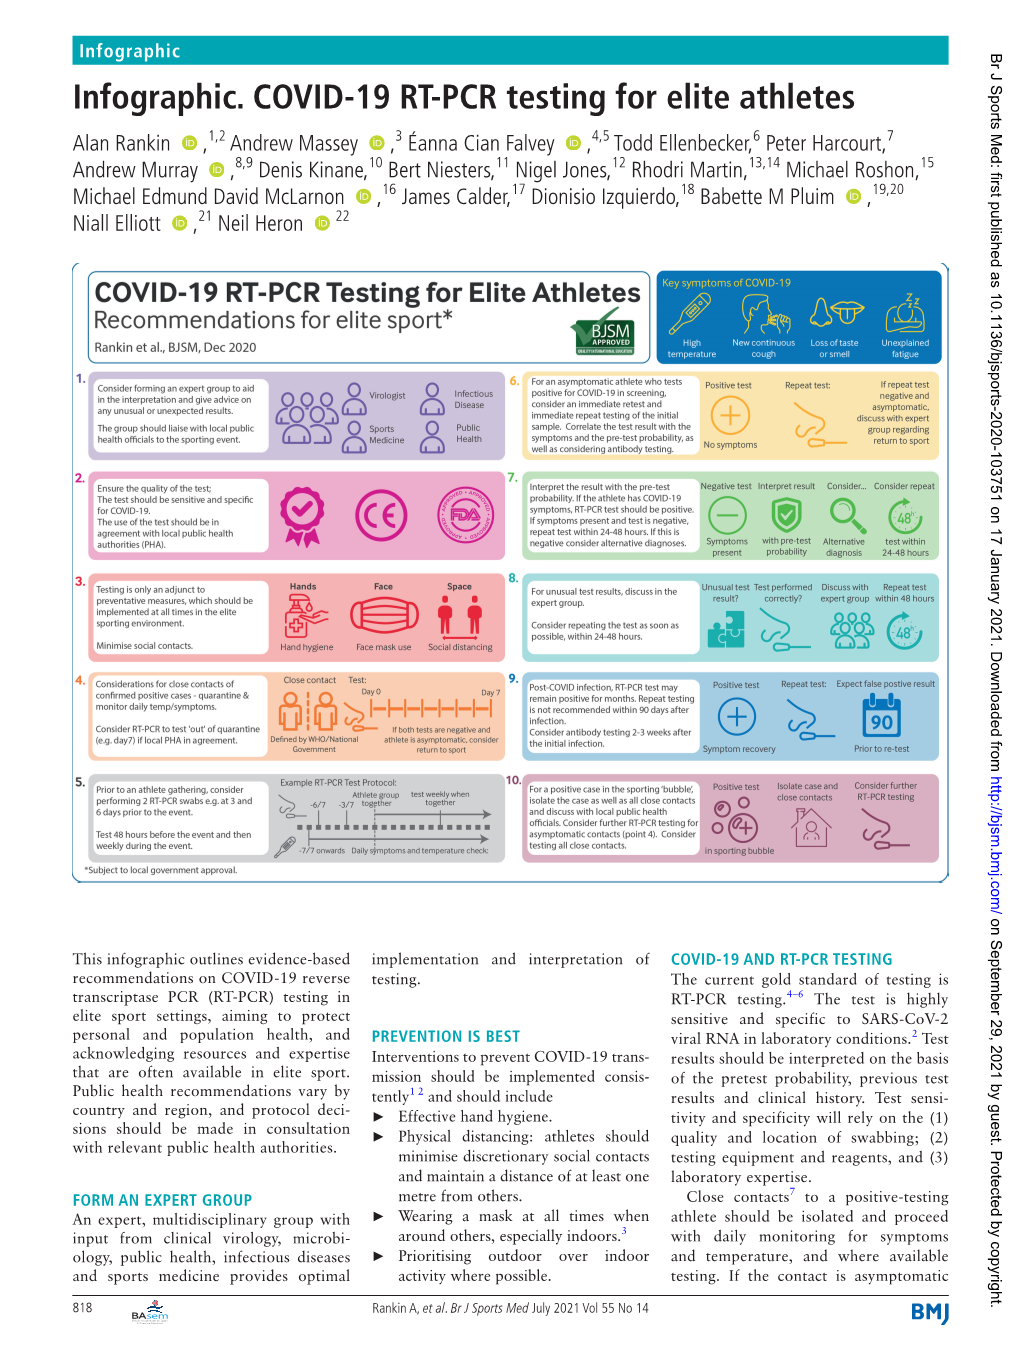 Infographic. COVID-19 RT-PCR Testing for Elite Athletes